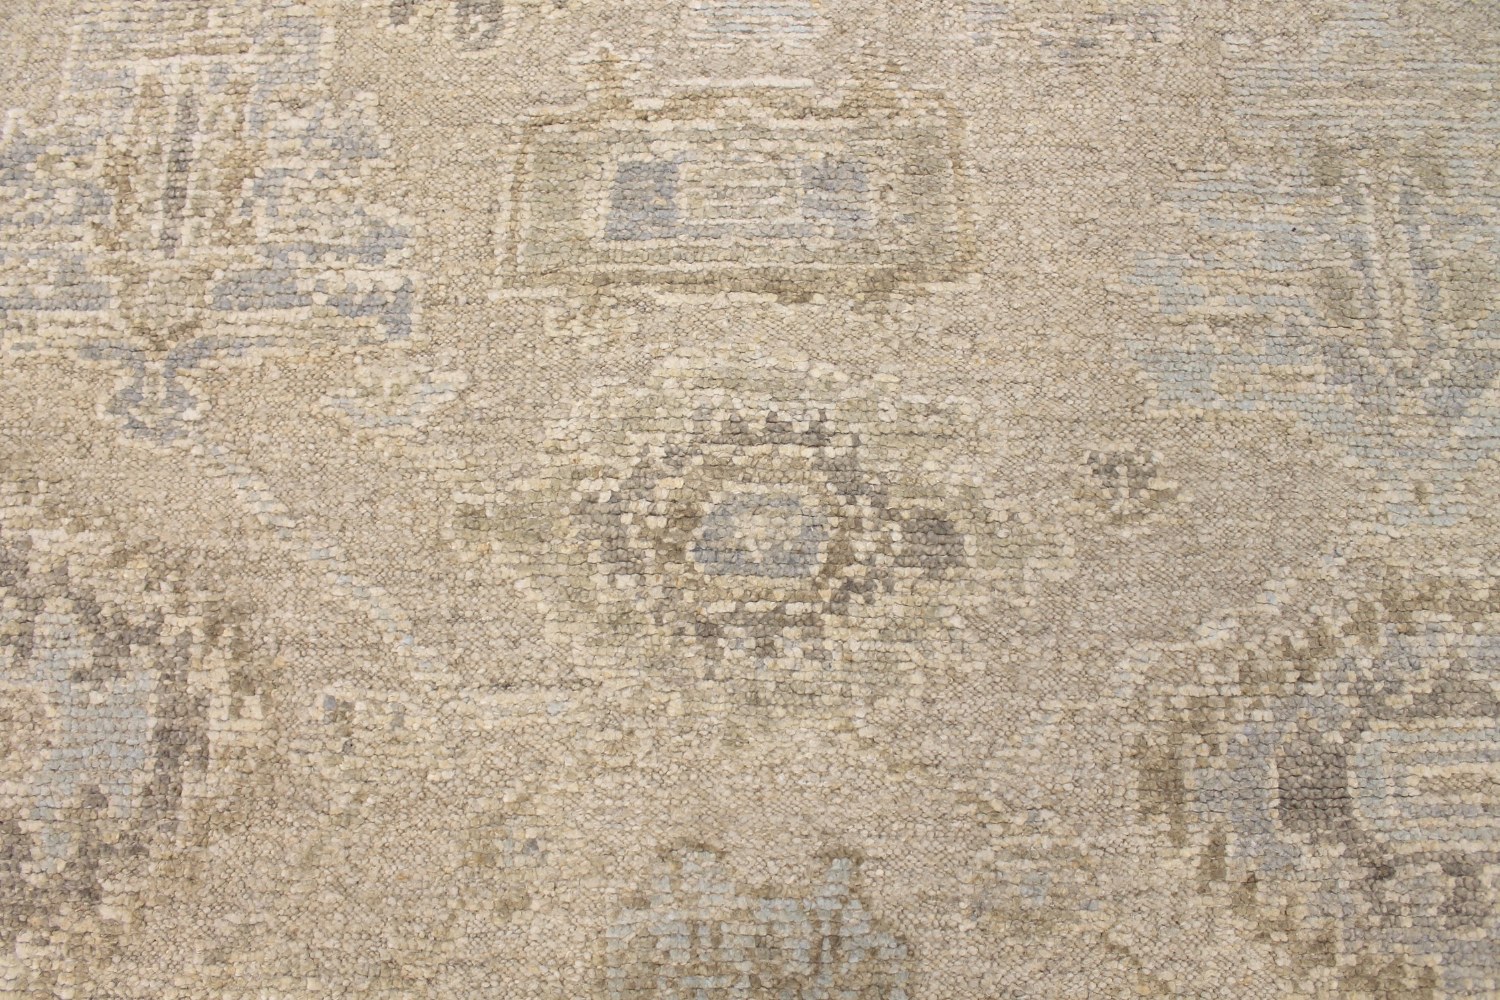 8x10 Oushak Hand Knotted Wool Area Rug - MR028903